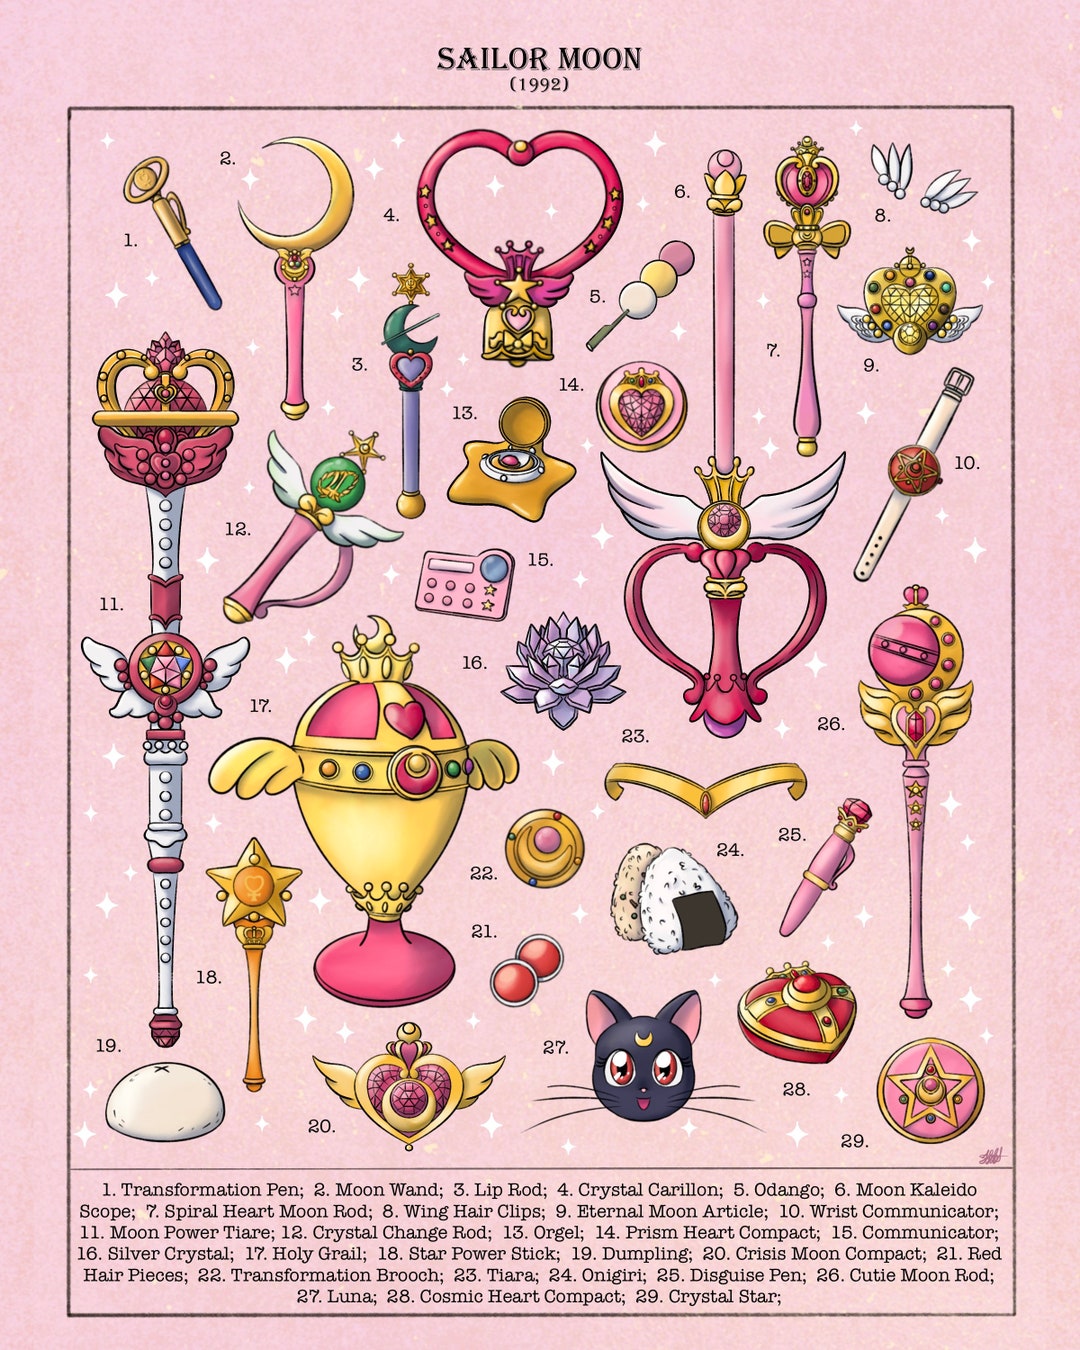 Sailor Moon Objects Anime Inspired Art Print picture pic